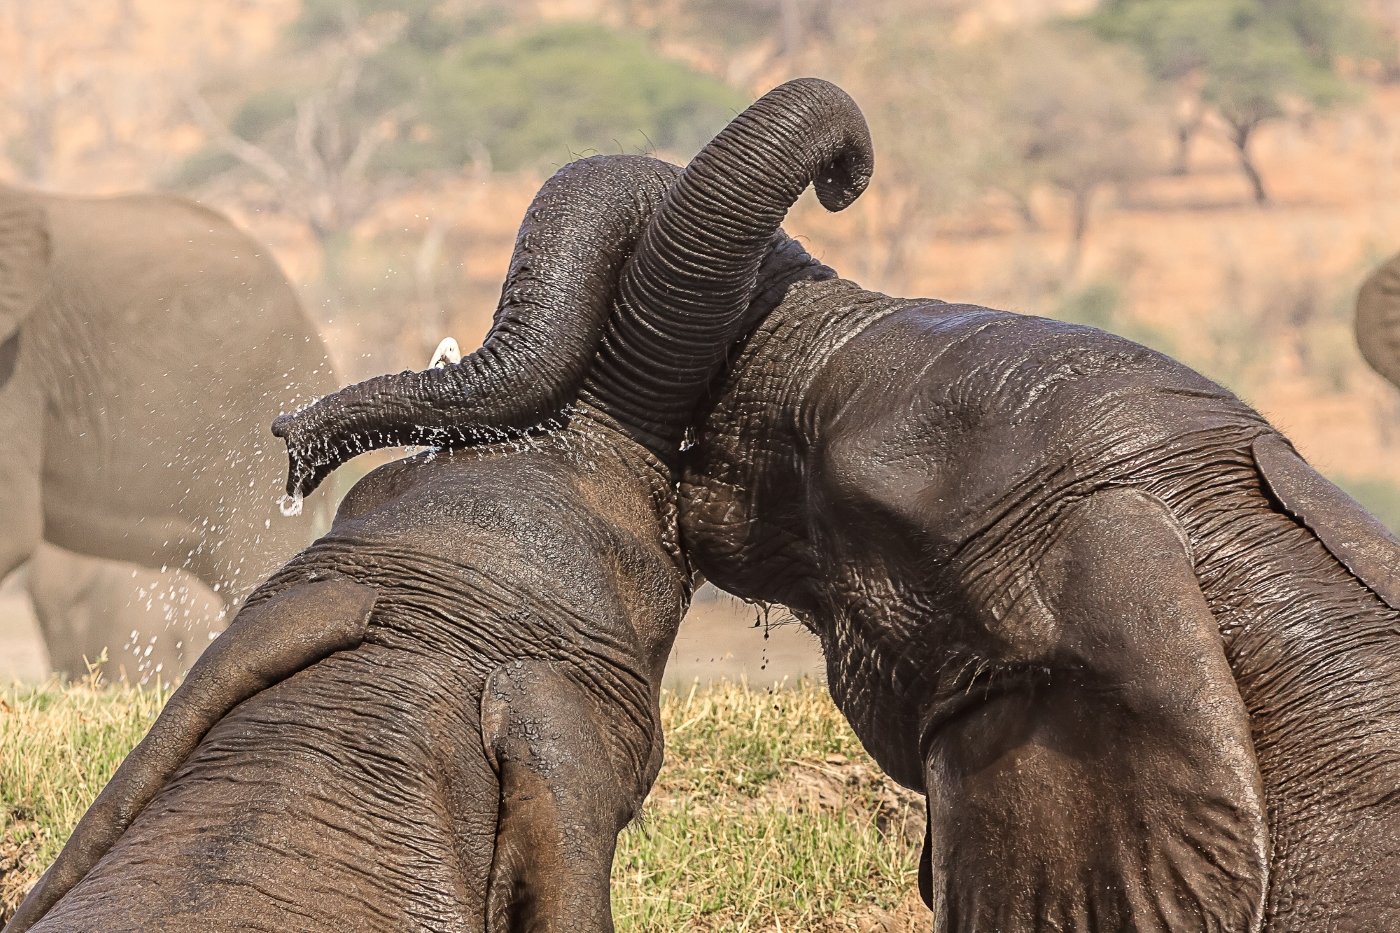 Ears Back Trunk Fight, Ron Varley, Heard Nature Photography Club, 1 HM